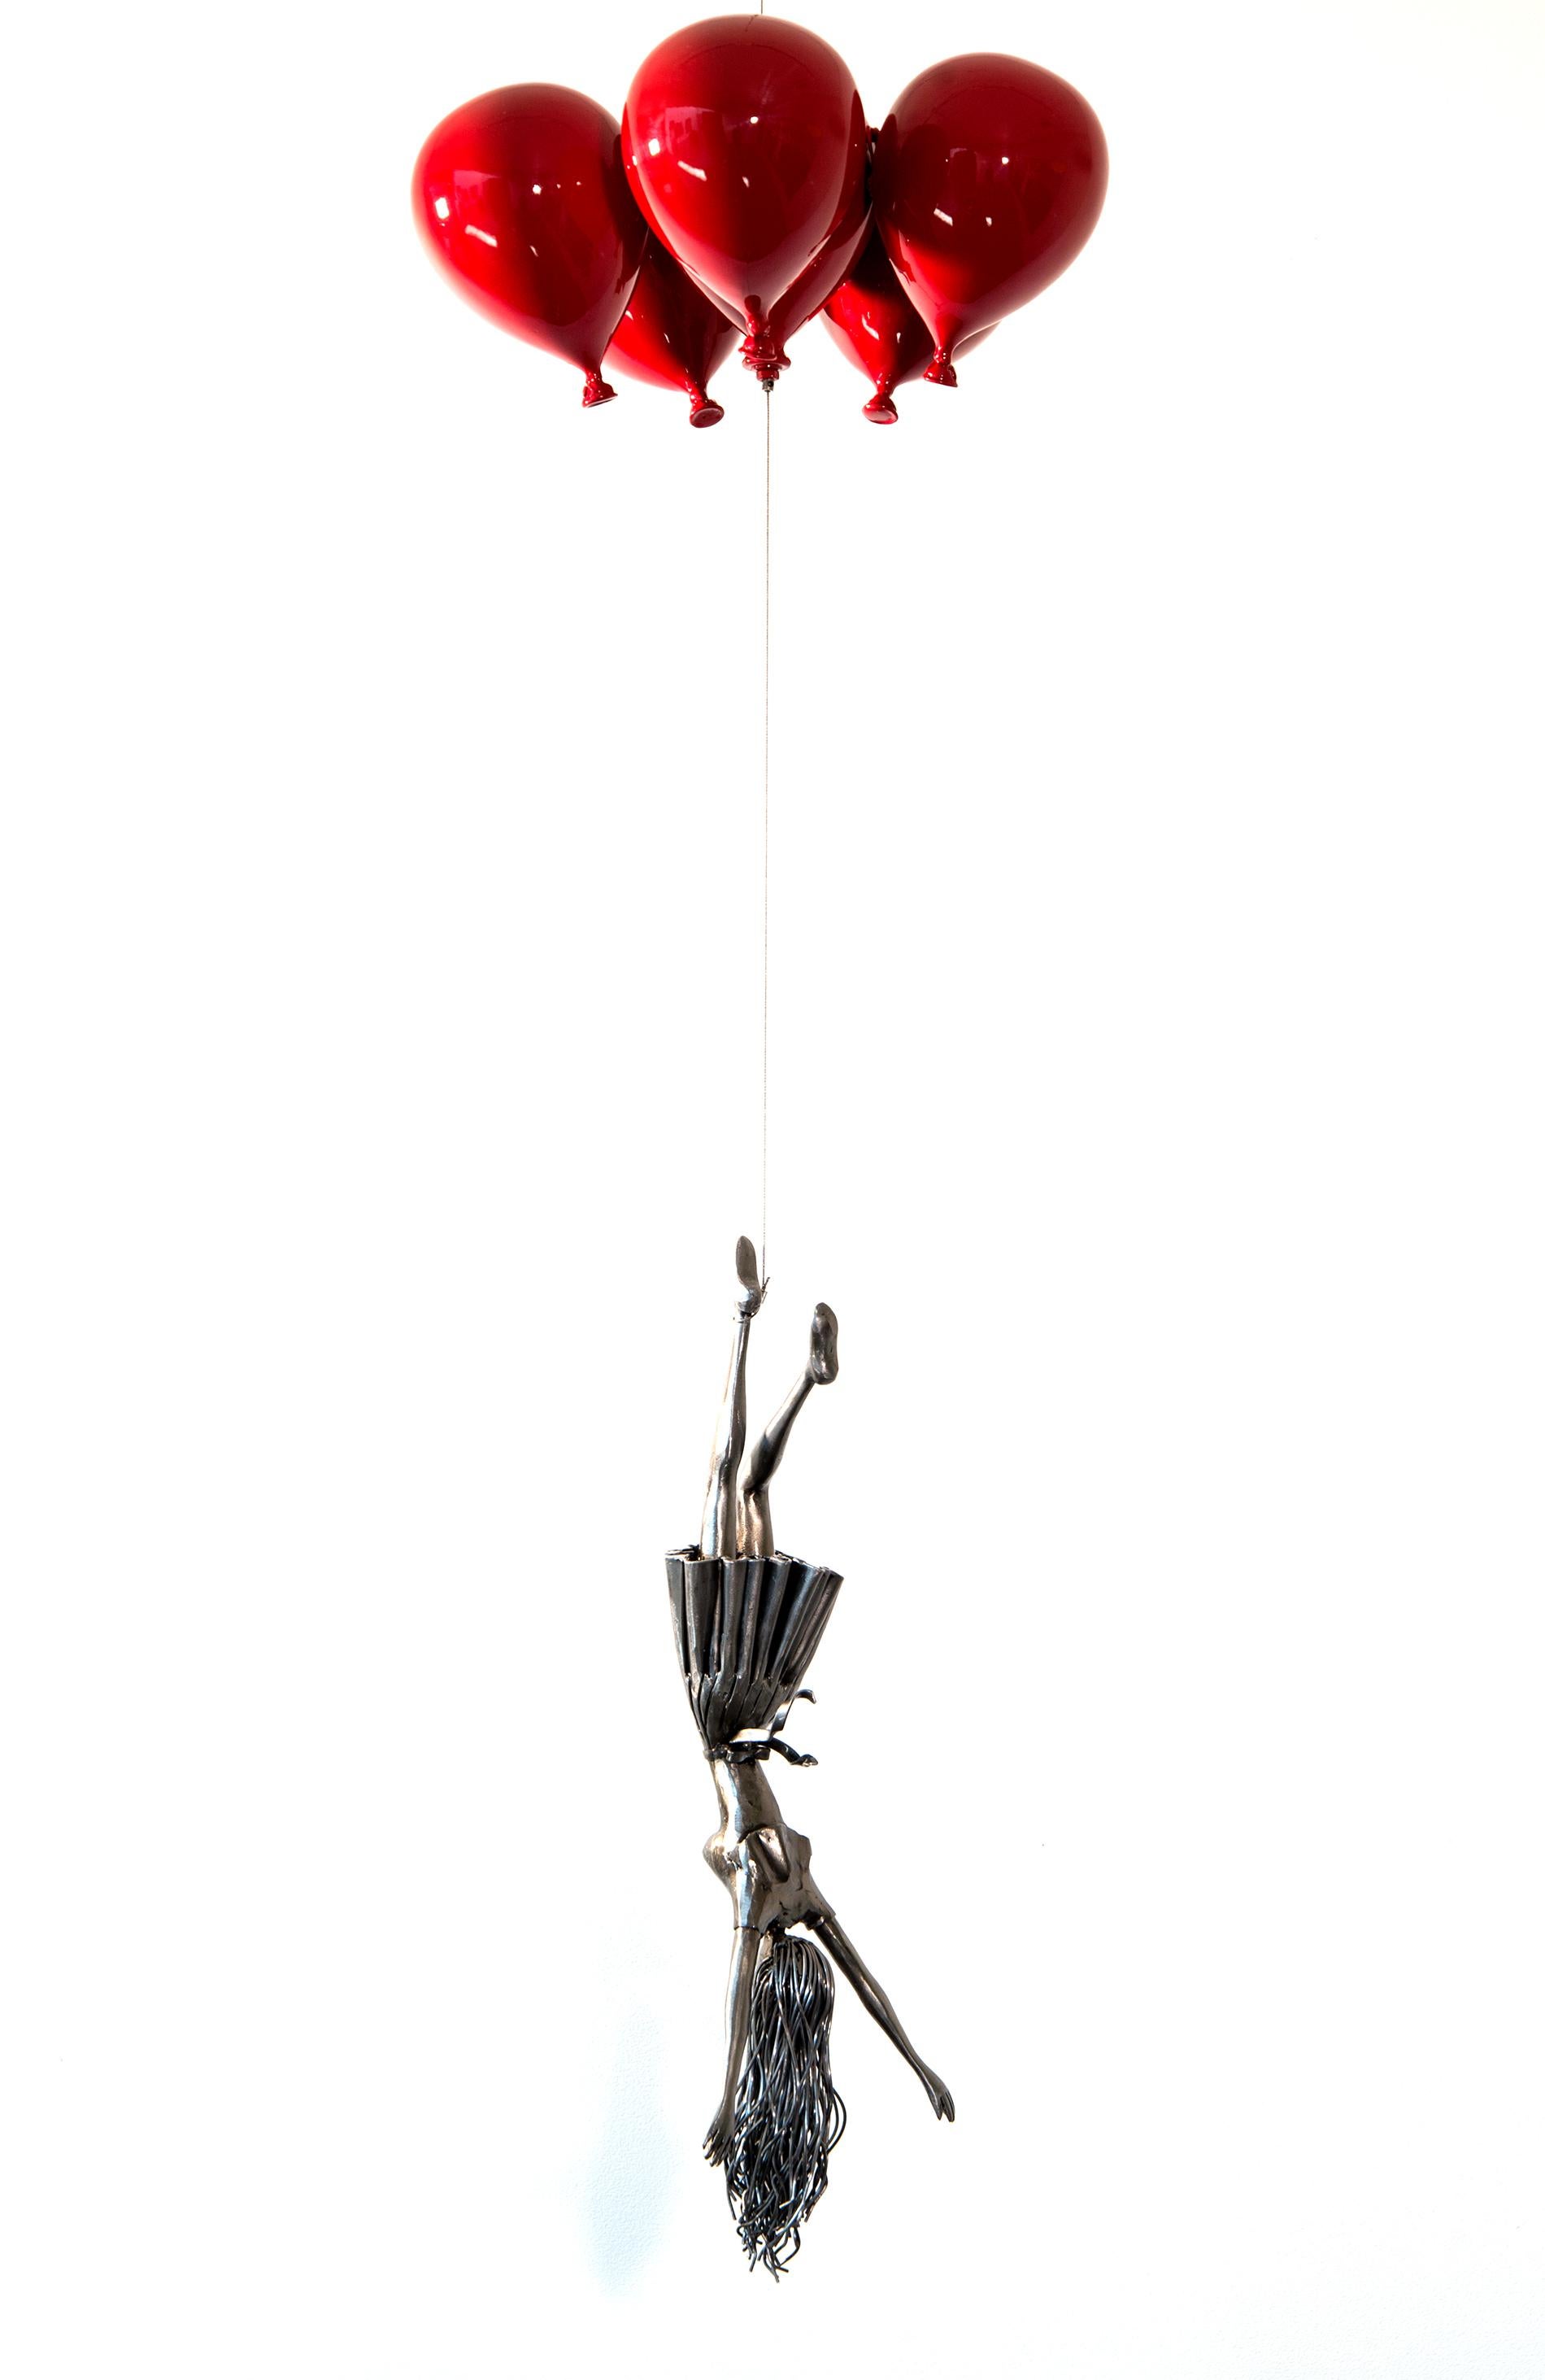 Red Line - woman, figure, steel, colorful, balloons, suspended sculpture 1